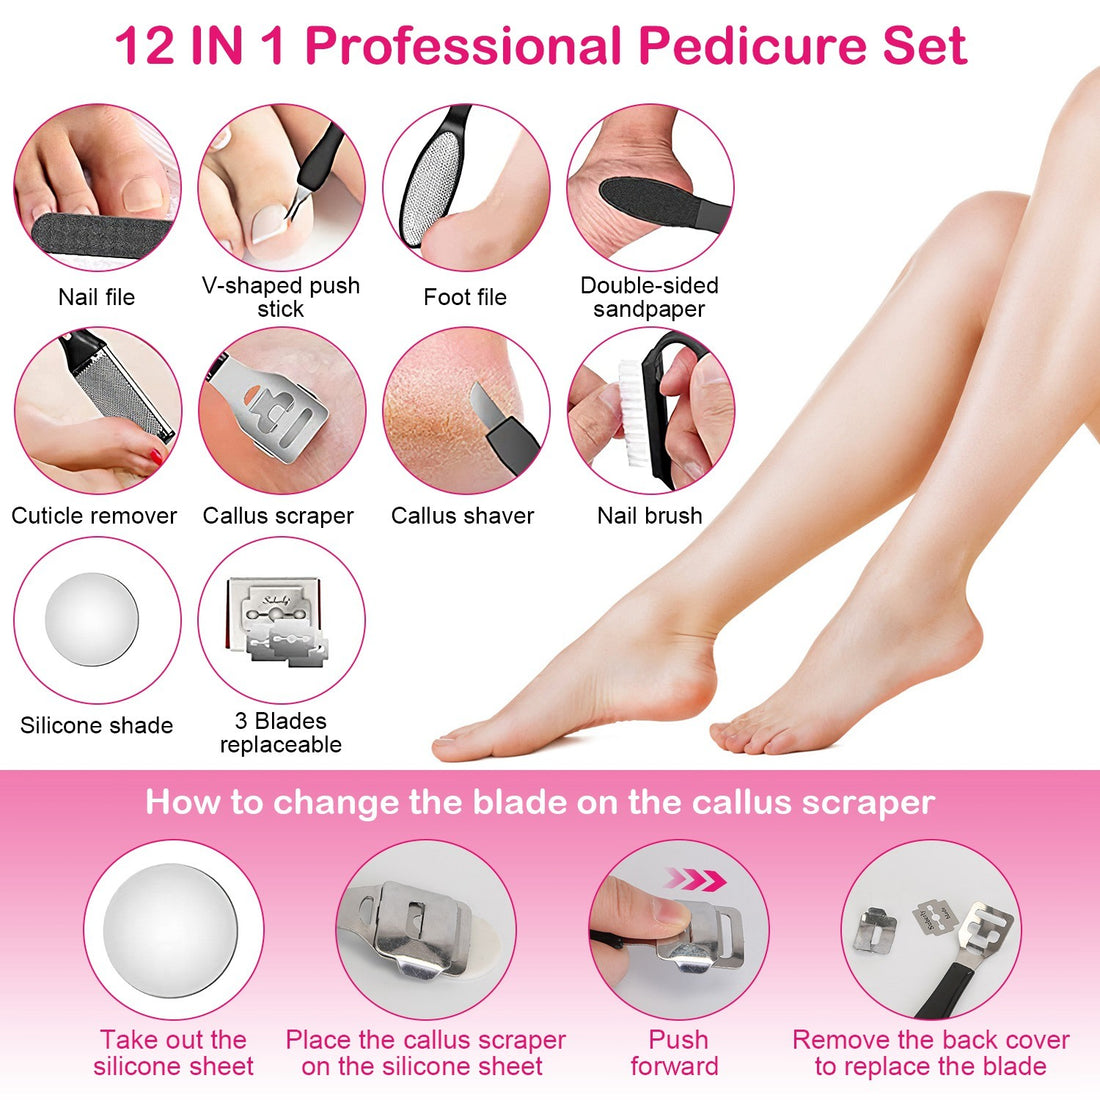 Electric Foot Callus Remover Foot Grinder Rechargeable Foot File Dead Skin Pedicure Machine